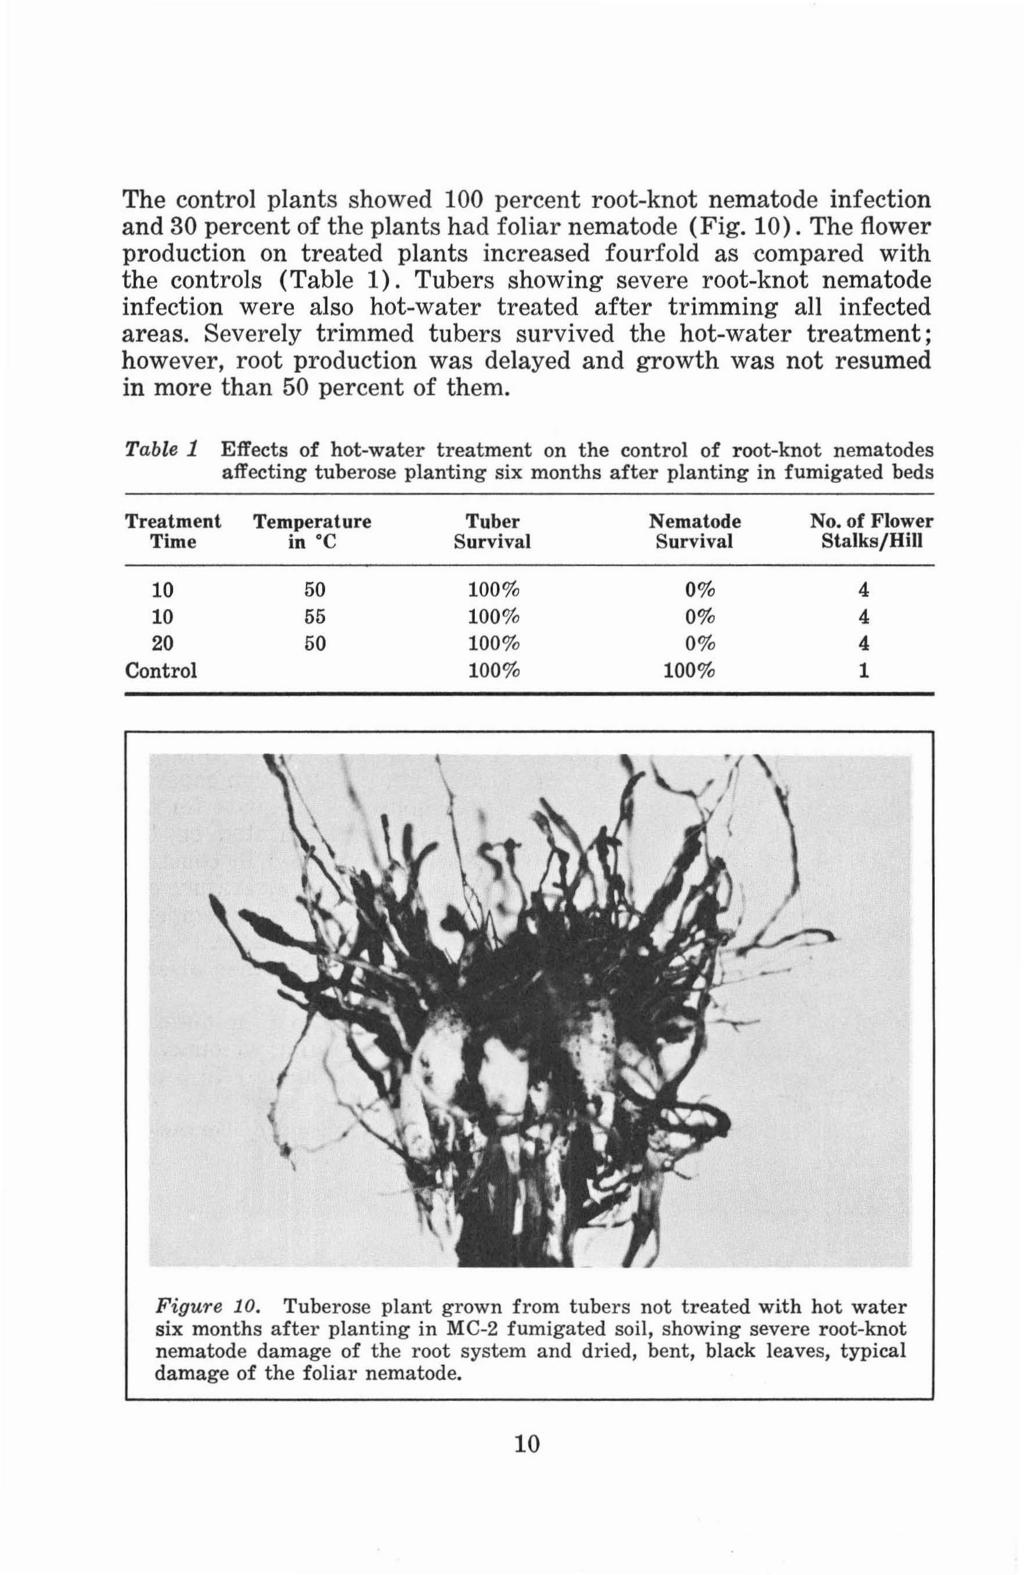 The control plants showed 100 percent root-knot nematode infection and 30 percent of the plants had foliar nematode (Fig. 10).